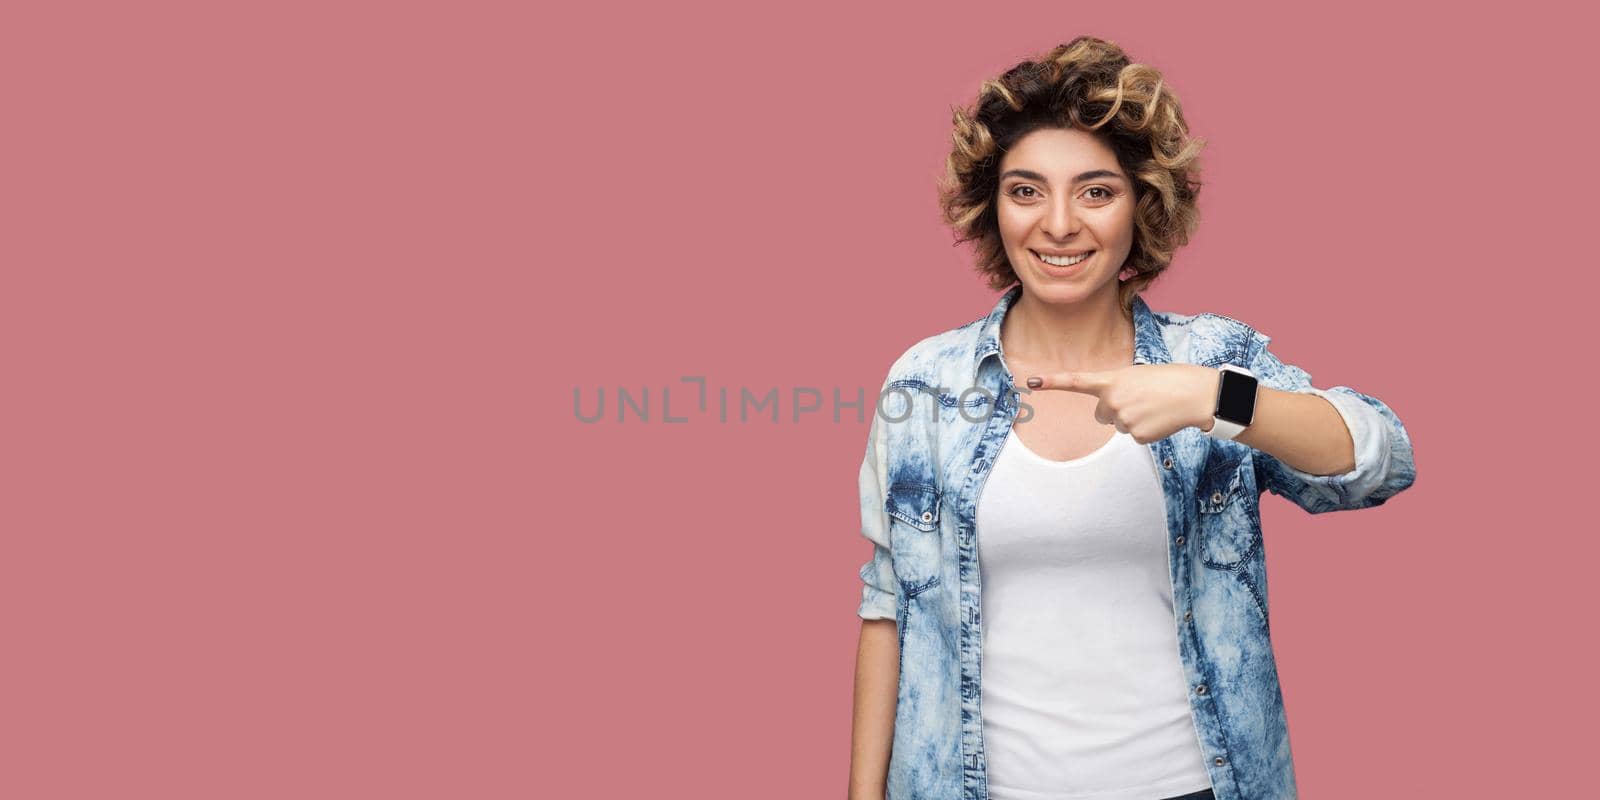 Portrait of young happy woman with curly hairstyle in casual blue shirt standing, toothy smile and pointing at background empty copyspace. indoor studio shot, isolated on pink background.